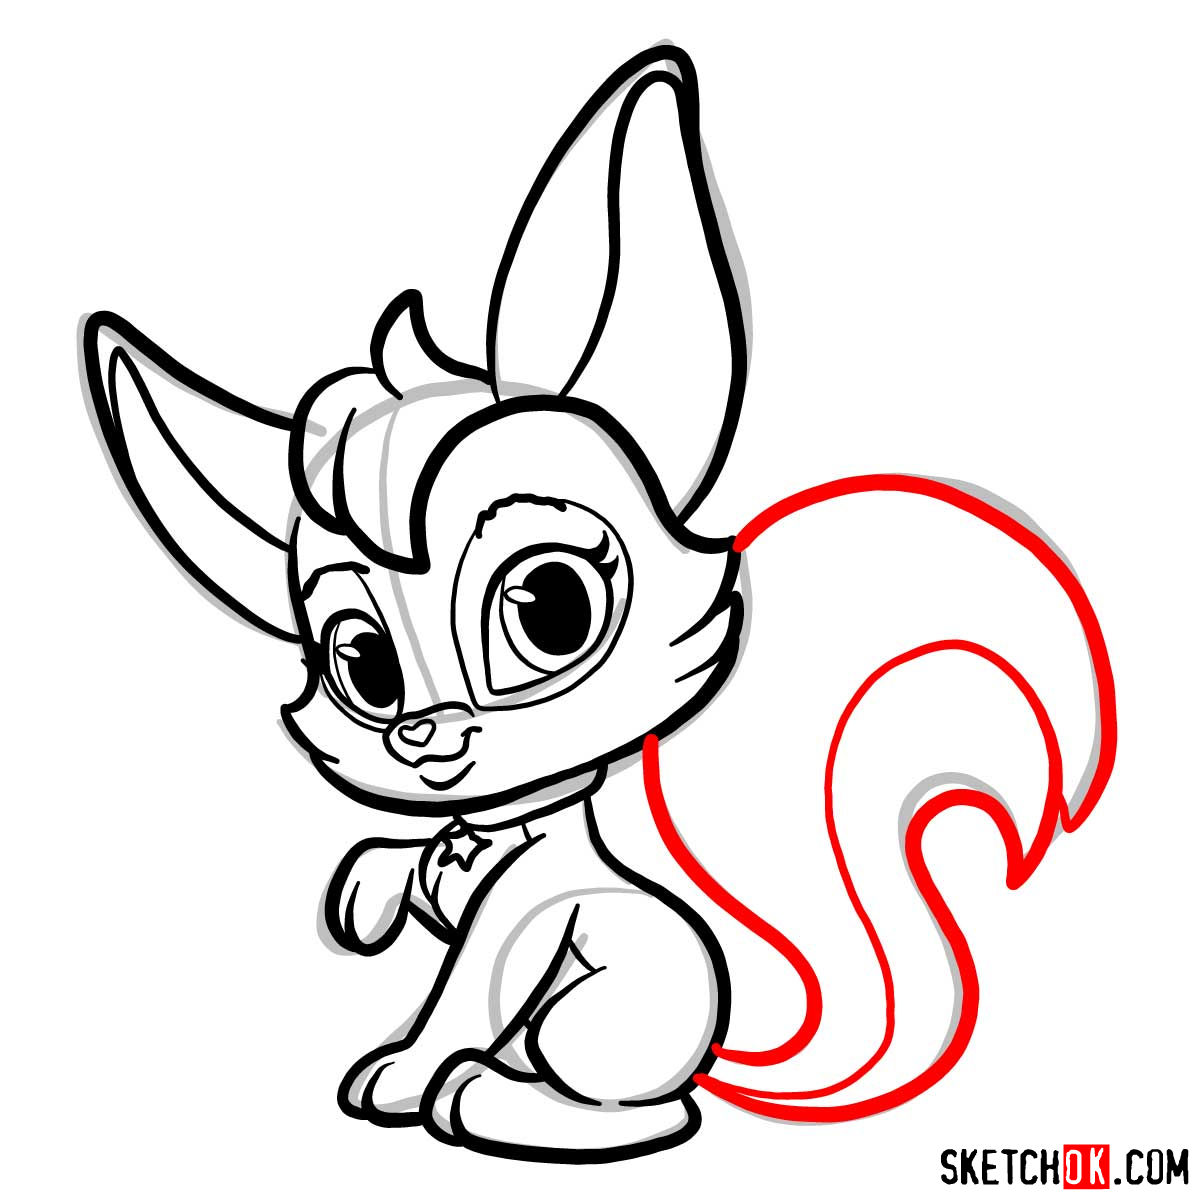 How to draw Parisa, a pet from Shimmer and Shine - step 08